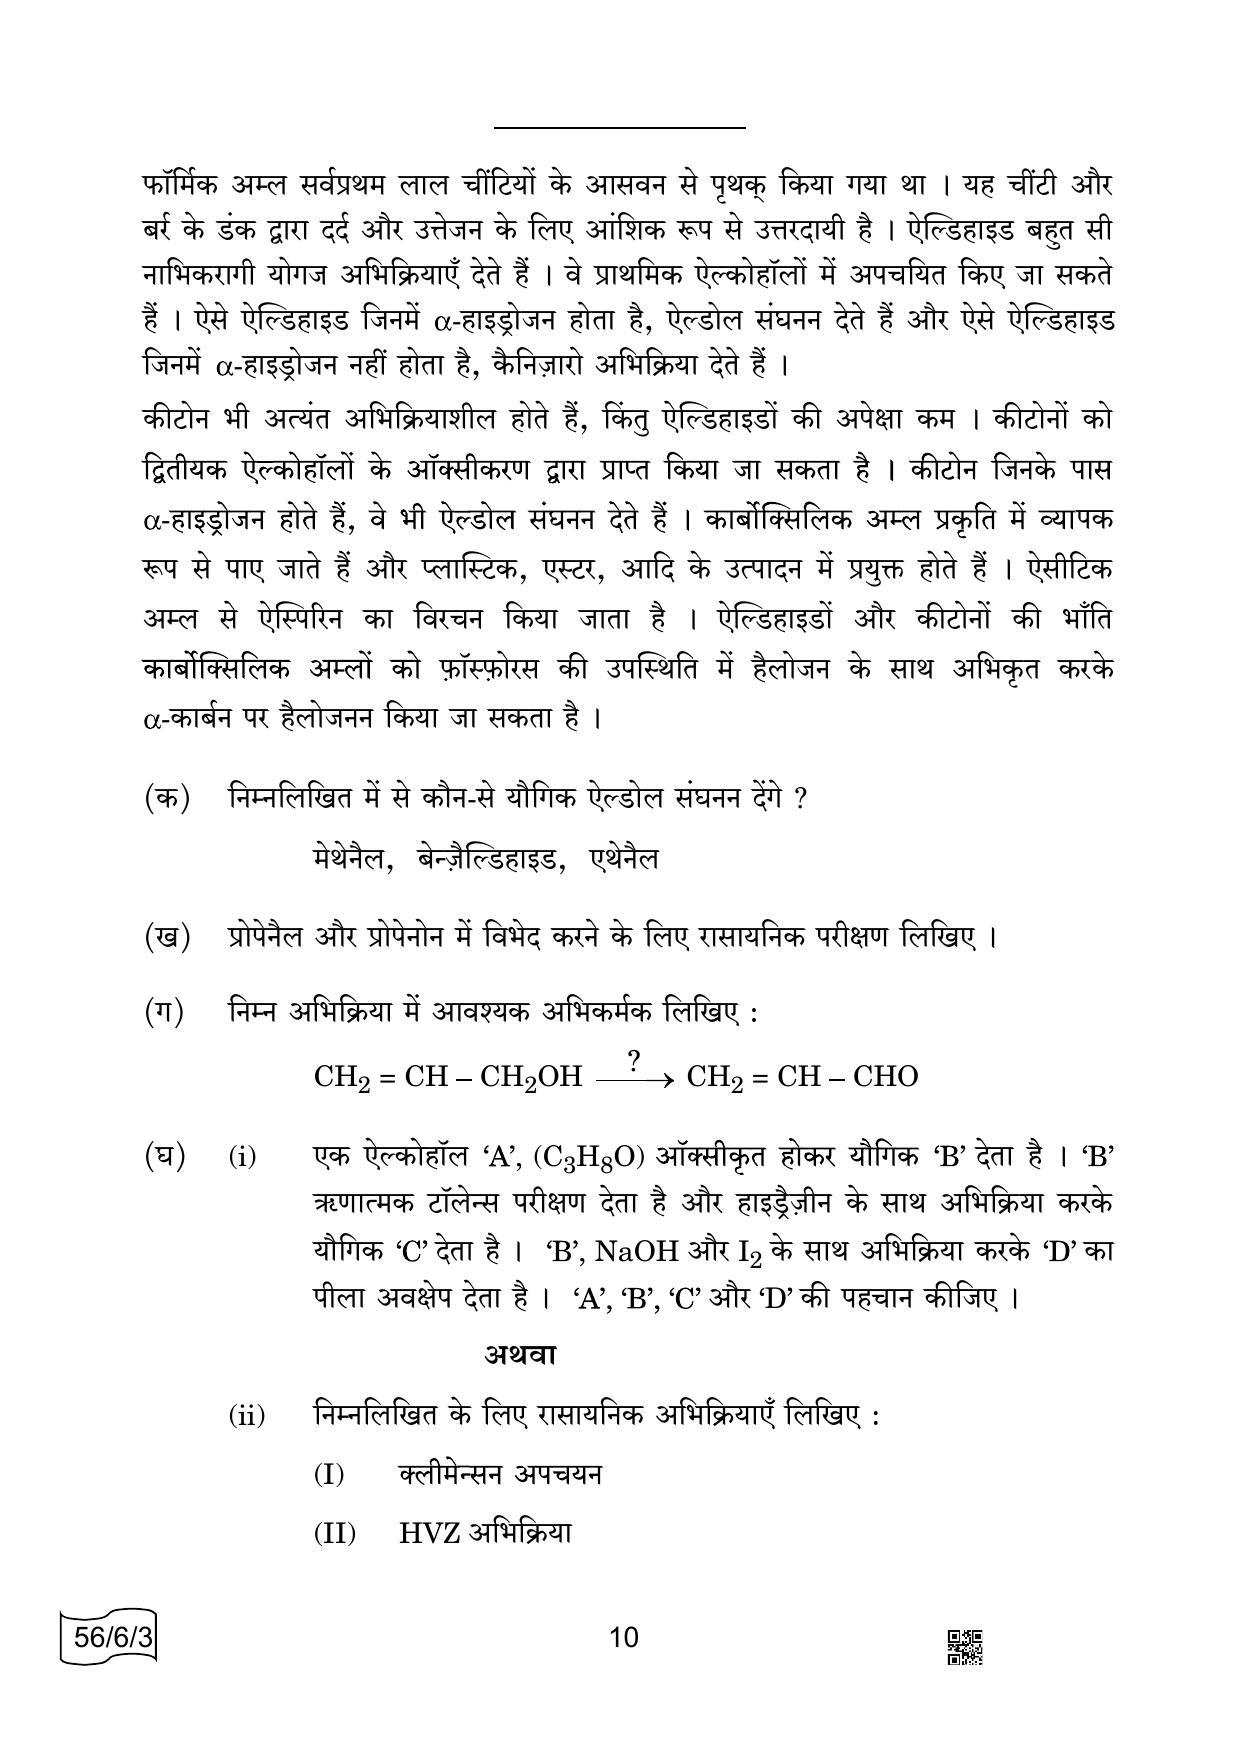 CBSE Class 12 56-6-3 CHEMISTRY 2022 Compartment Question Paper - Page 10